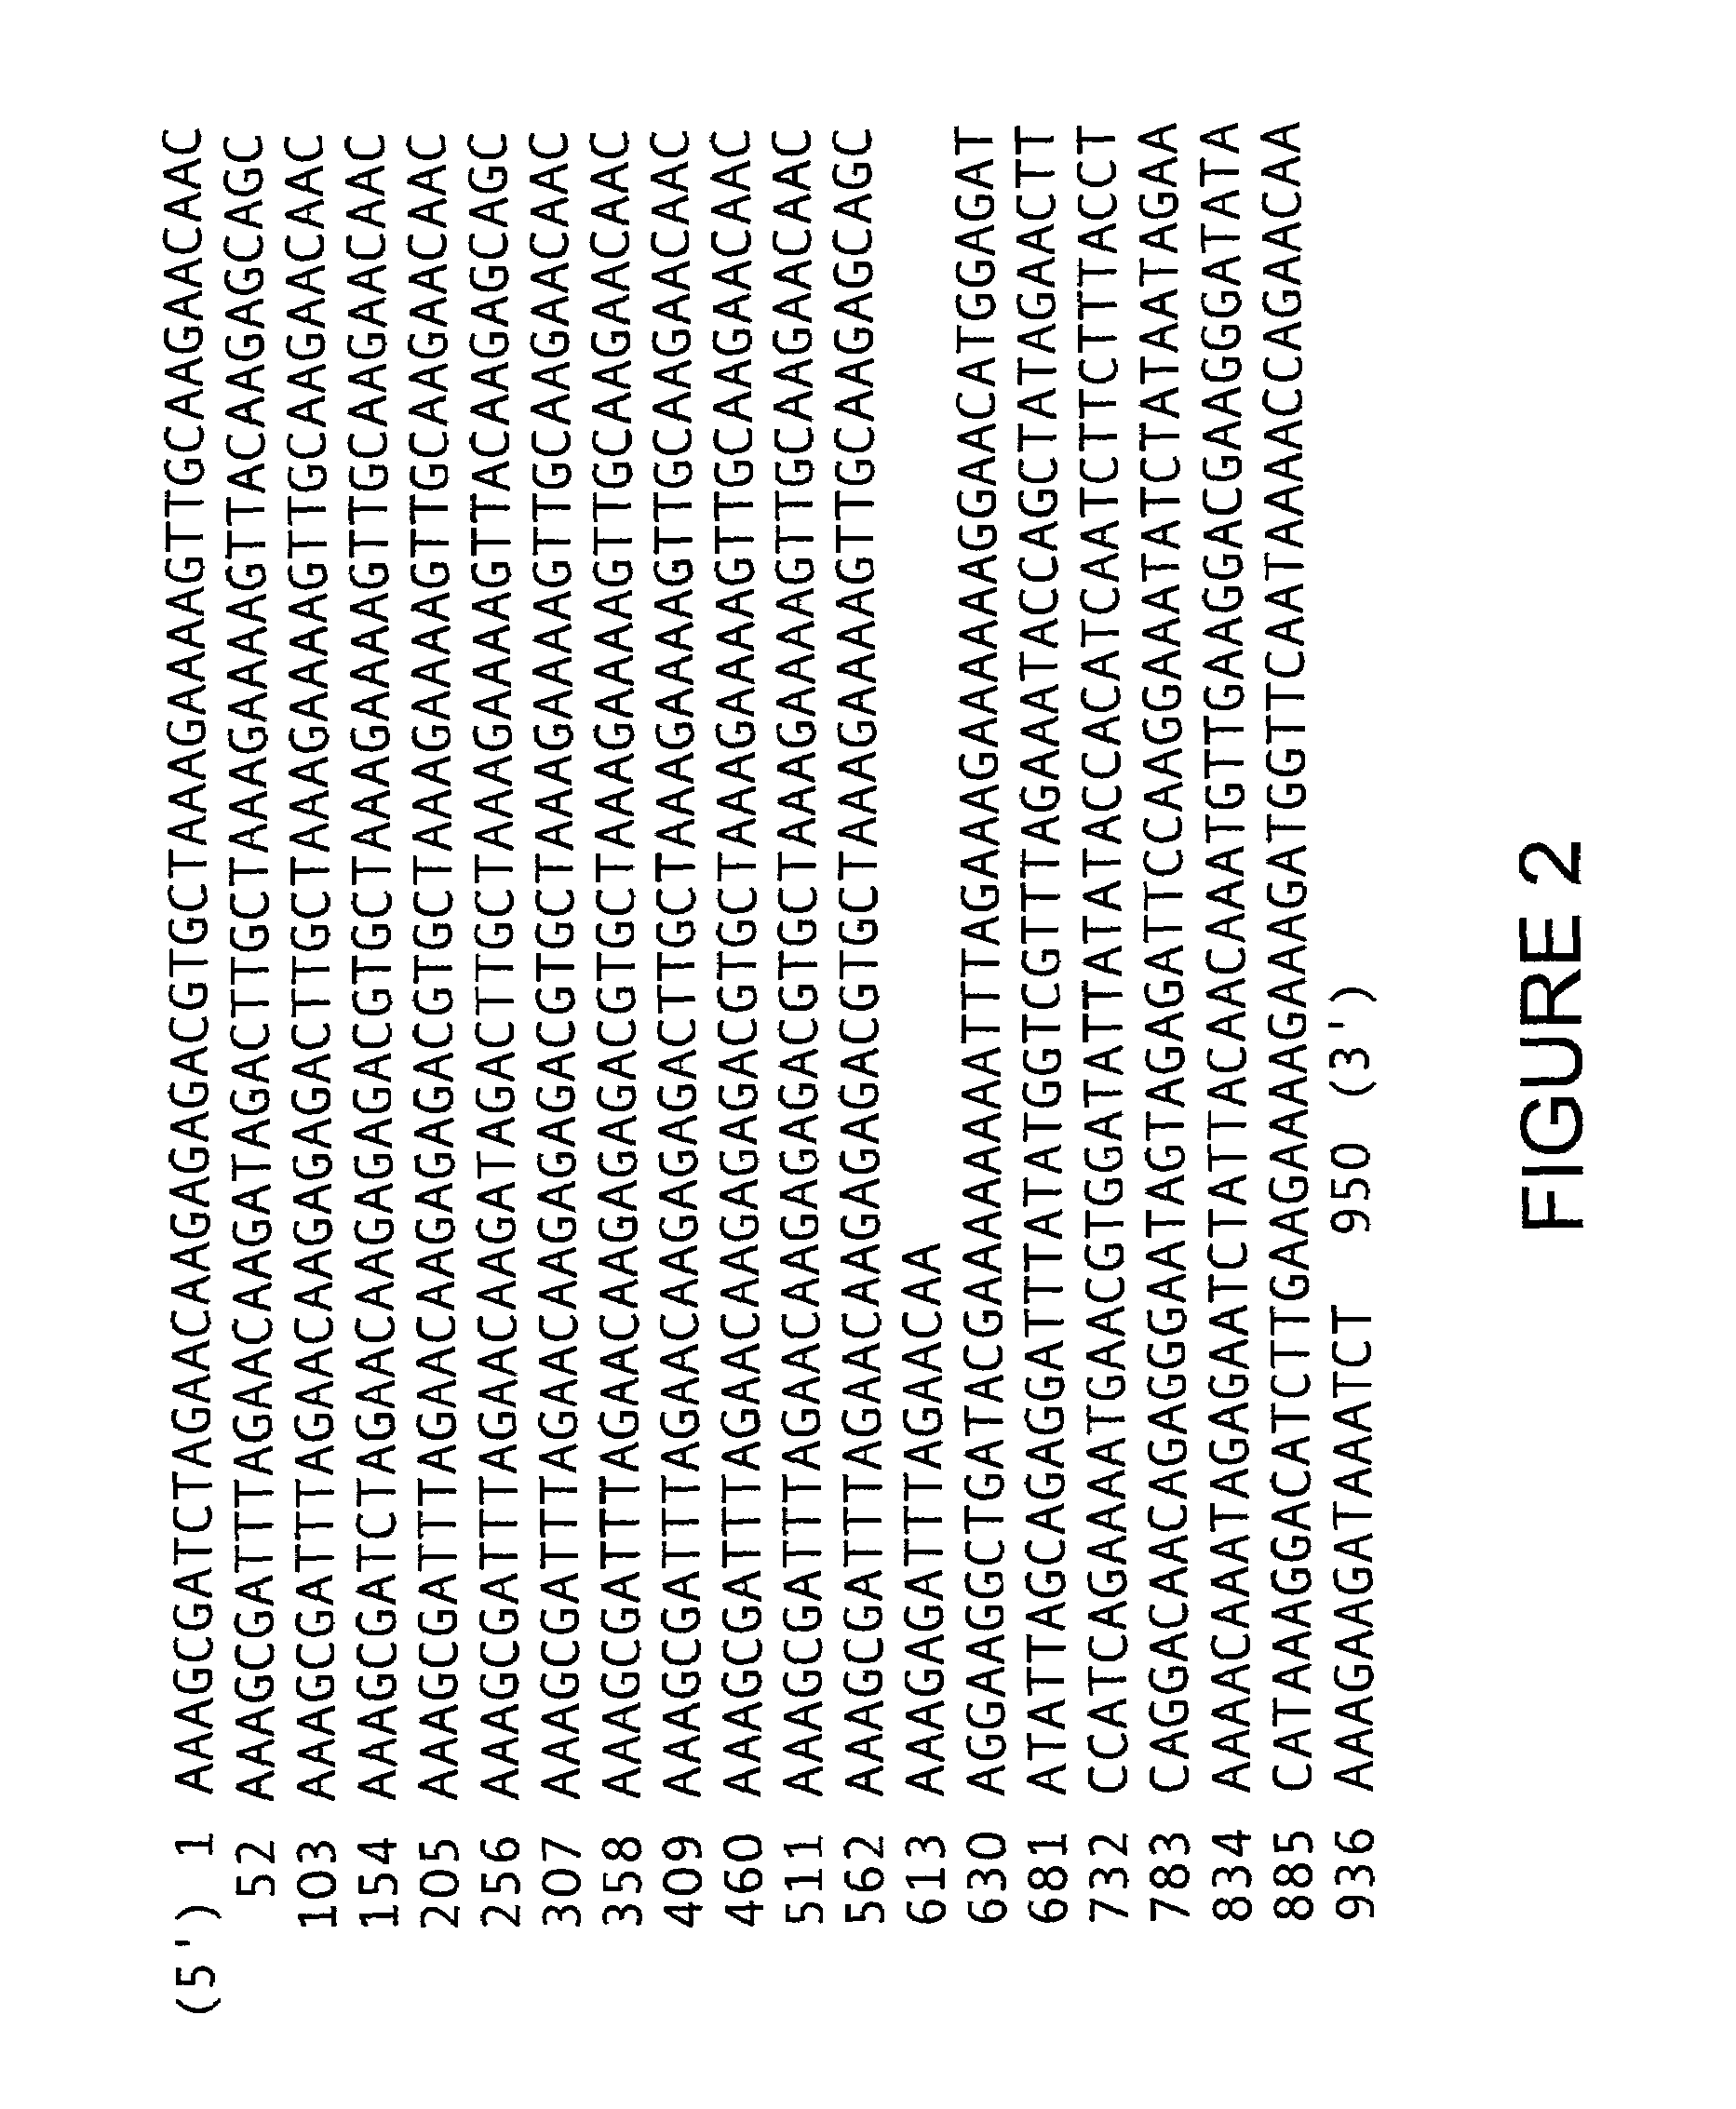 Peptide sequences specific for the hepatic stages of <i>P. falciparum </i>bearing epitopes capable of stimulating the T lymphocytes